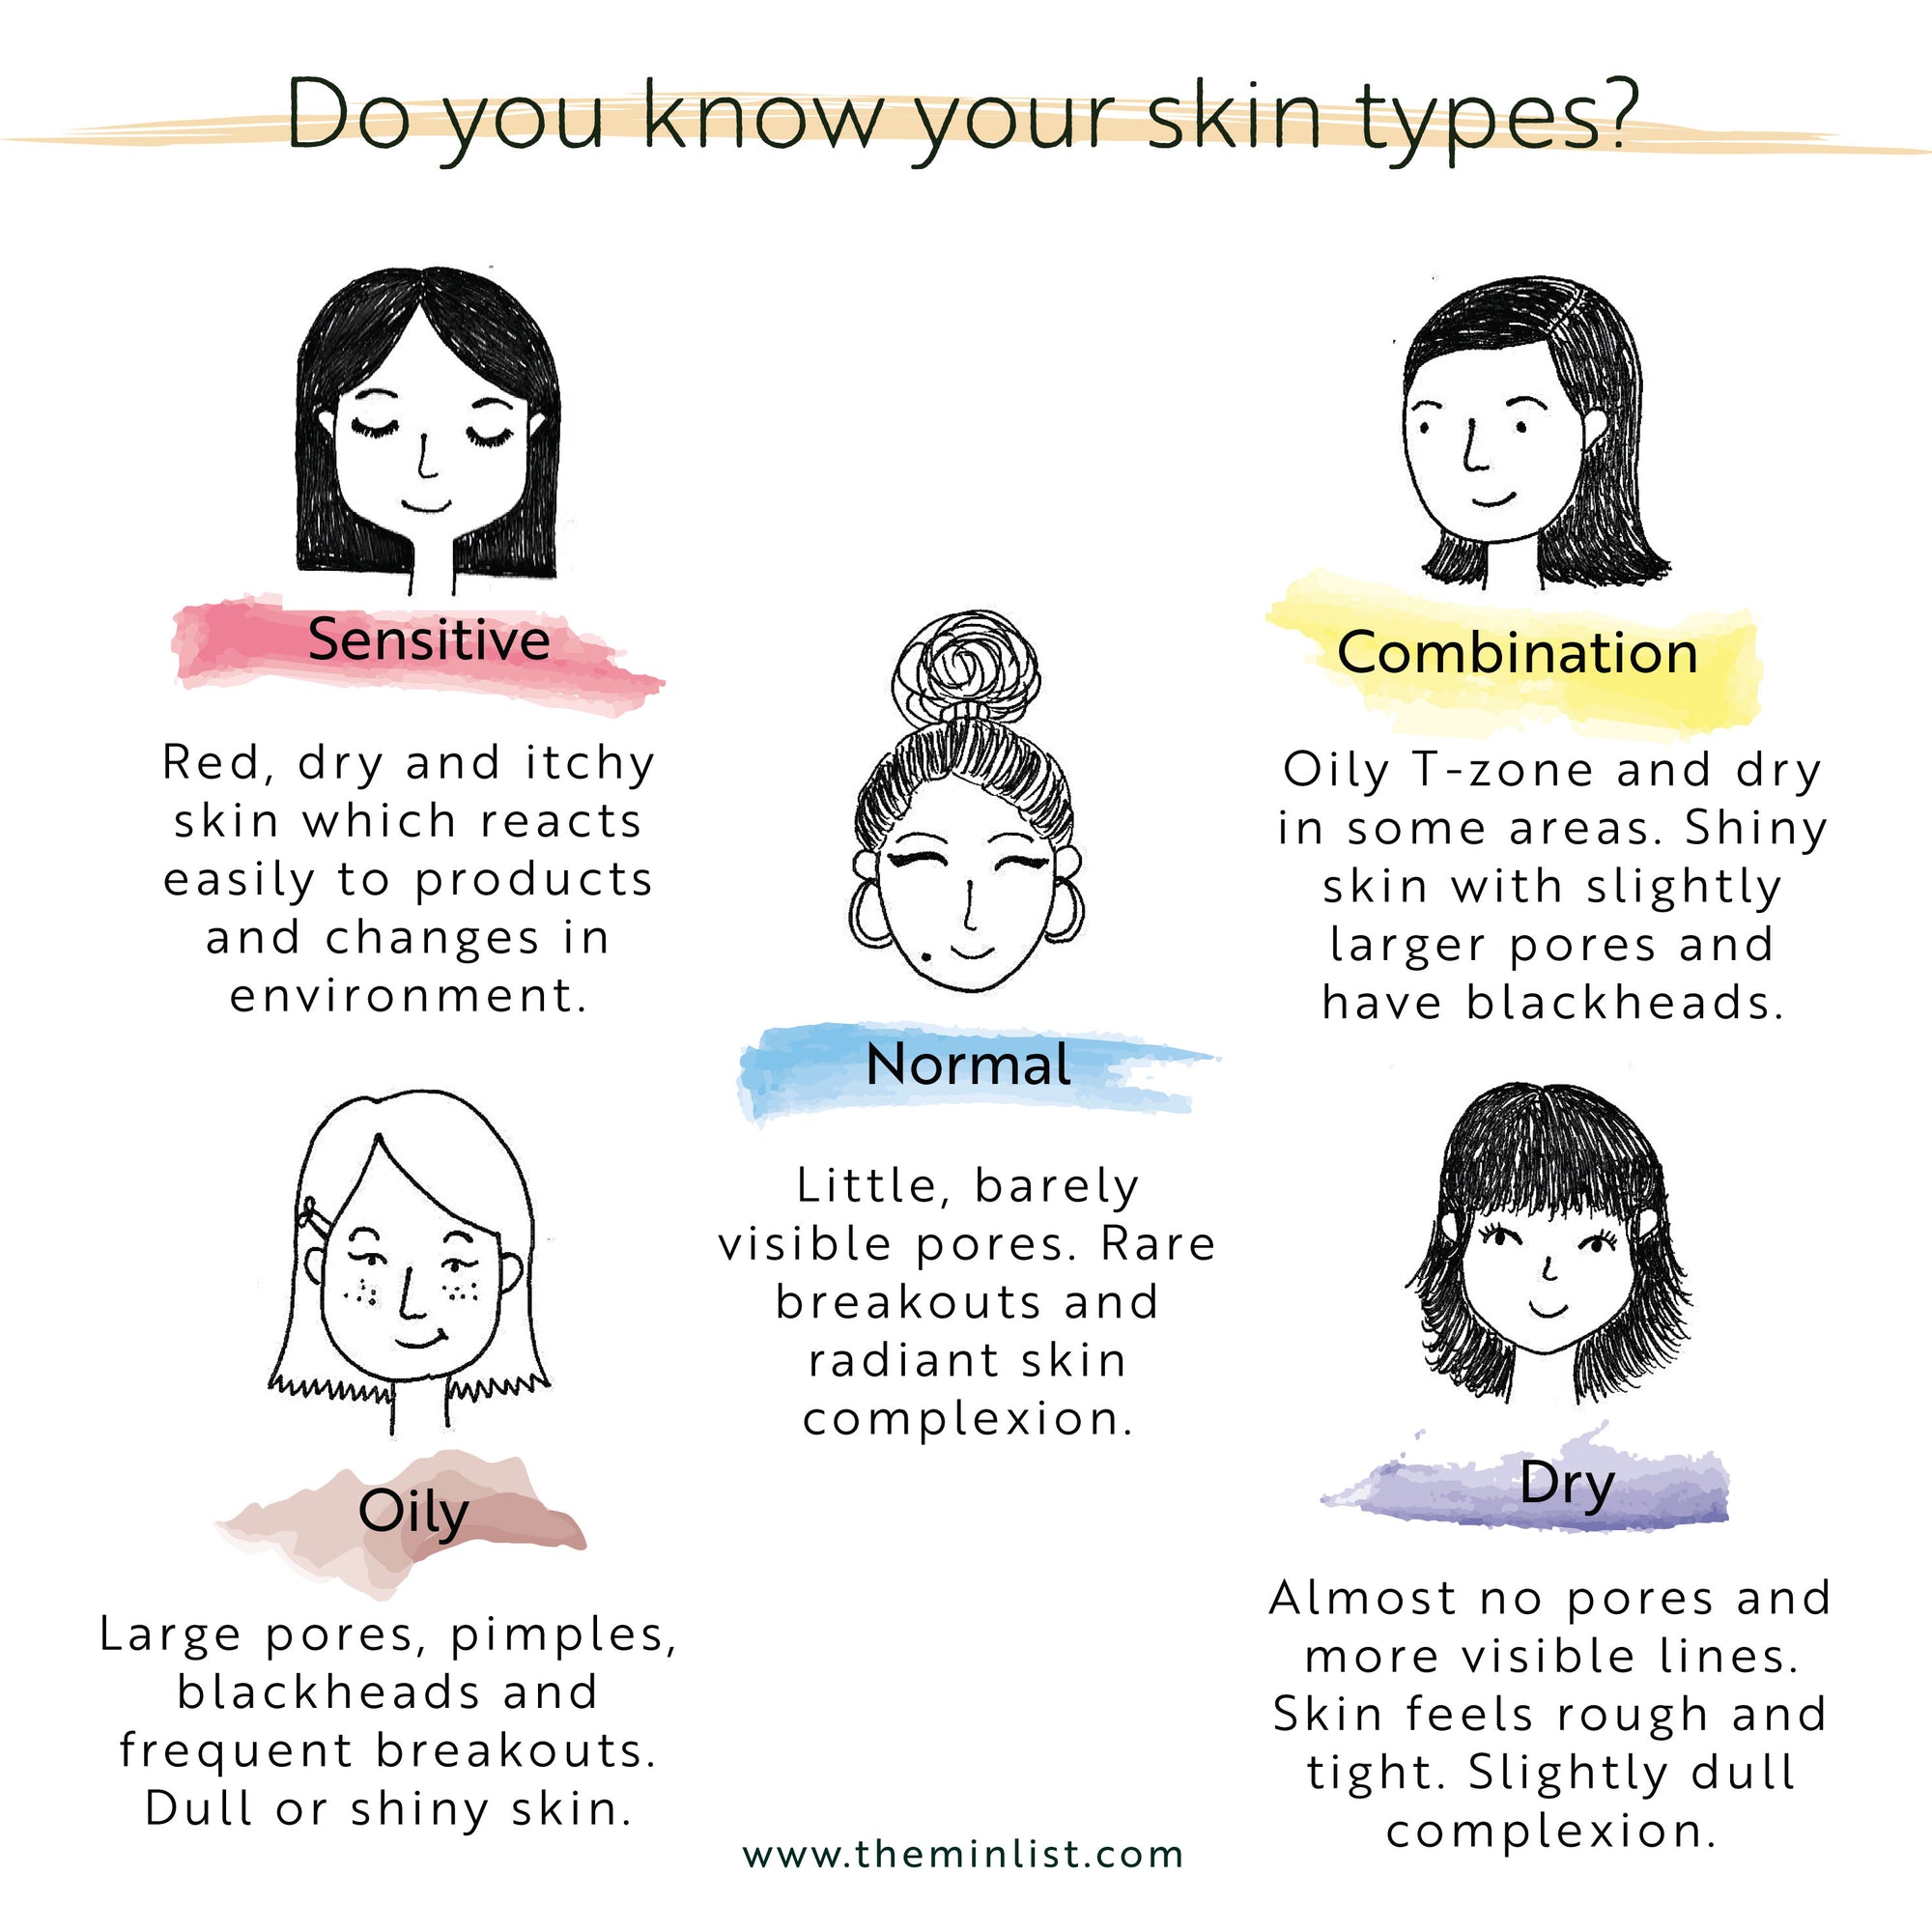 What Is My Skin Type?